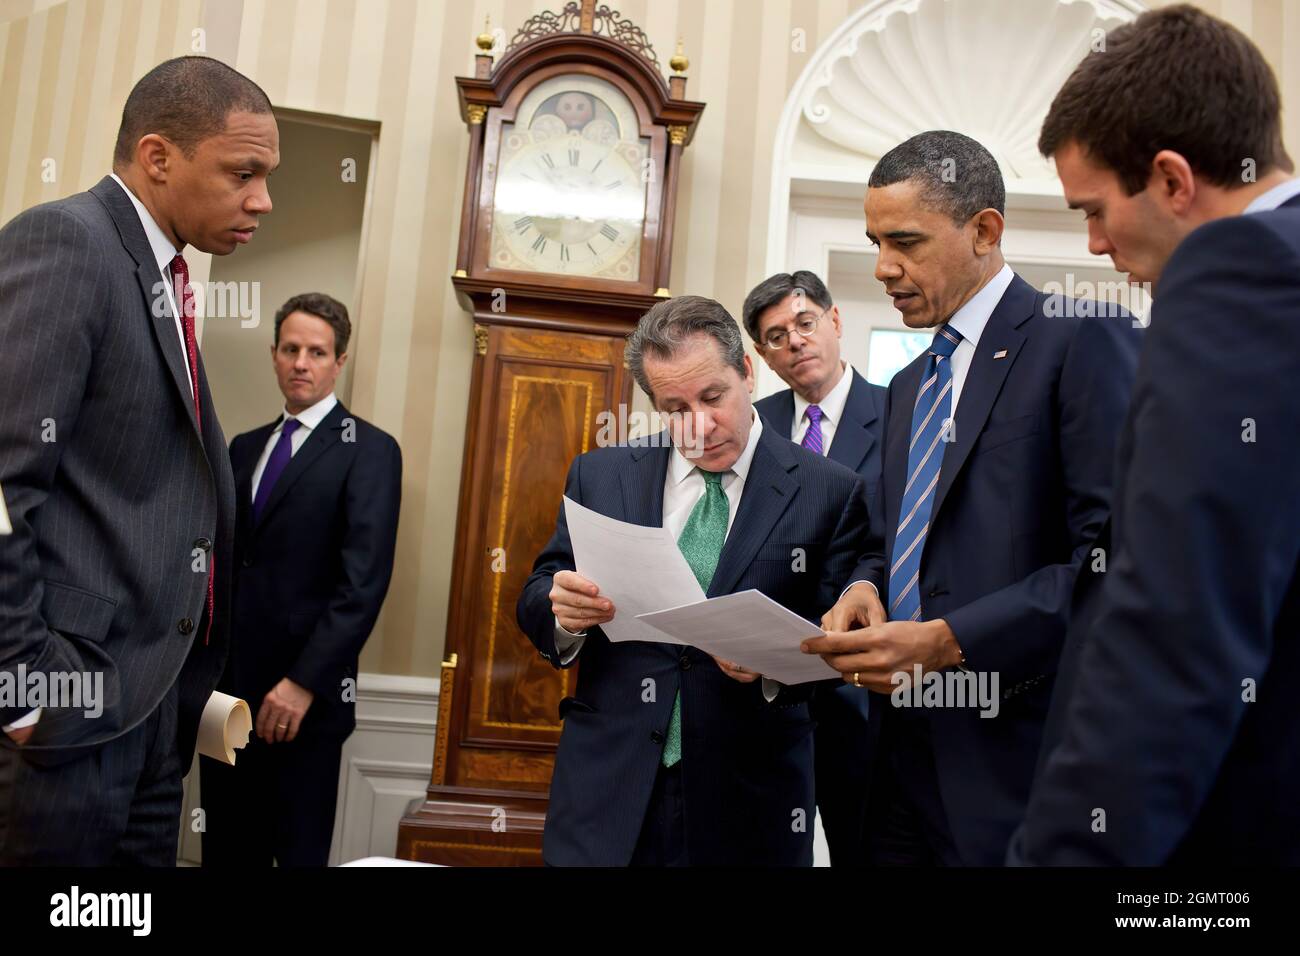 President Barack Obama reviews his fiscal policy speech with advisors in the Oval Office, April 13, 2011. Pictured, from left, are: Rob Nabors, Assistant to the President for Legislative Affairs; Treasury Secretary Timothy Geithner; National Economic Council Director Gene Sperling; Office of Management and Budget Director Jack Lew; and Director of Speechwriting Jon Favreau. (Official White House Photo by Pete Souza)    This official White House photograph is being made available only for publication by news organizations and/or for personal use printing by the subject(s) of the photograph. The Stock Photo